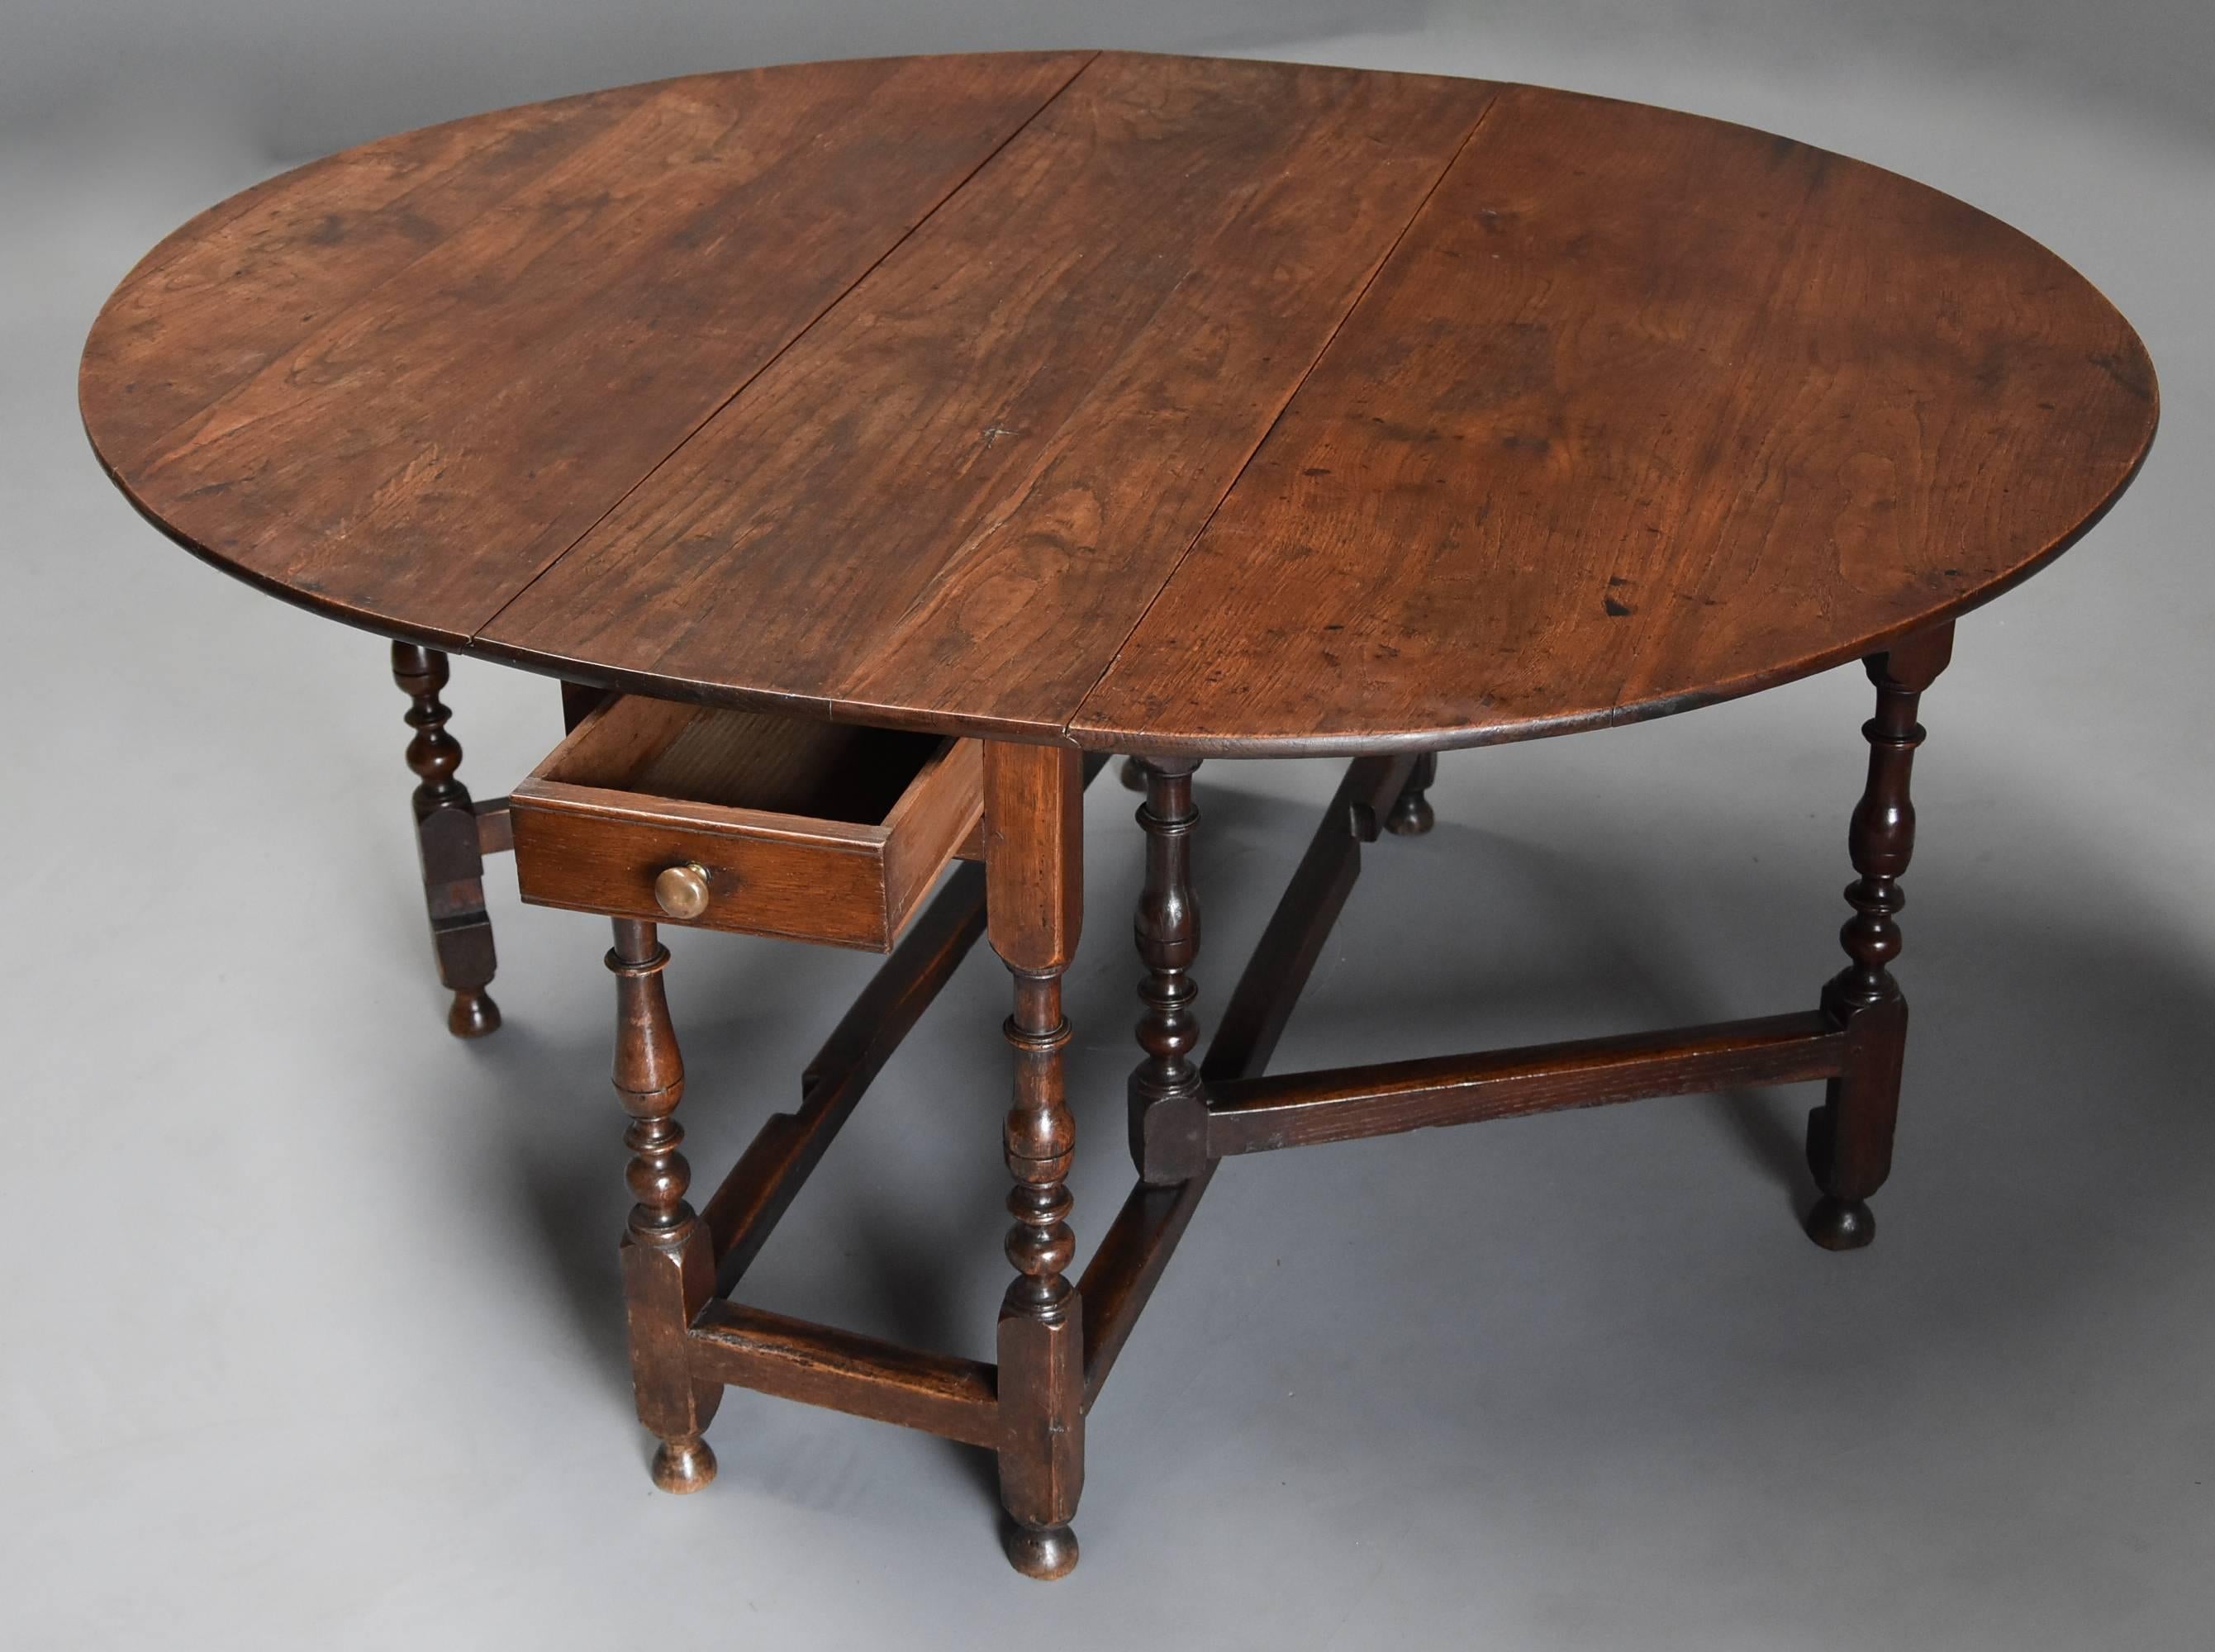 English Late 17th Century Oak Gateleg Table of Good, Versatile Size with Fine Patina For Sale